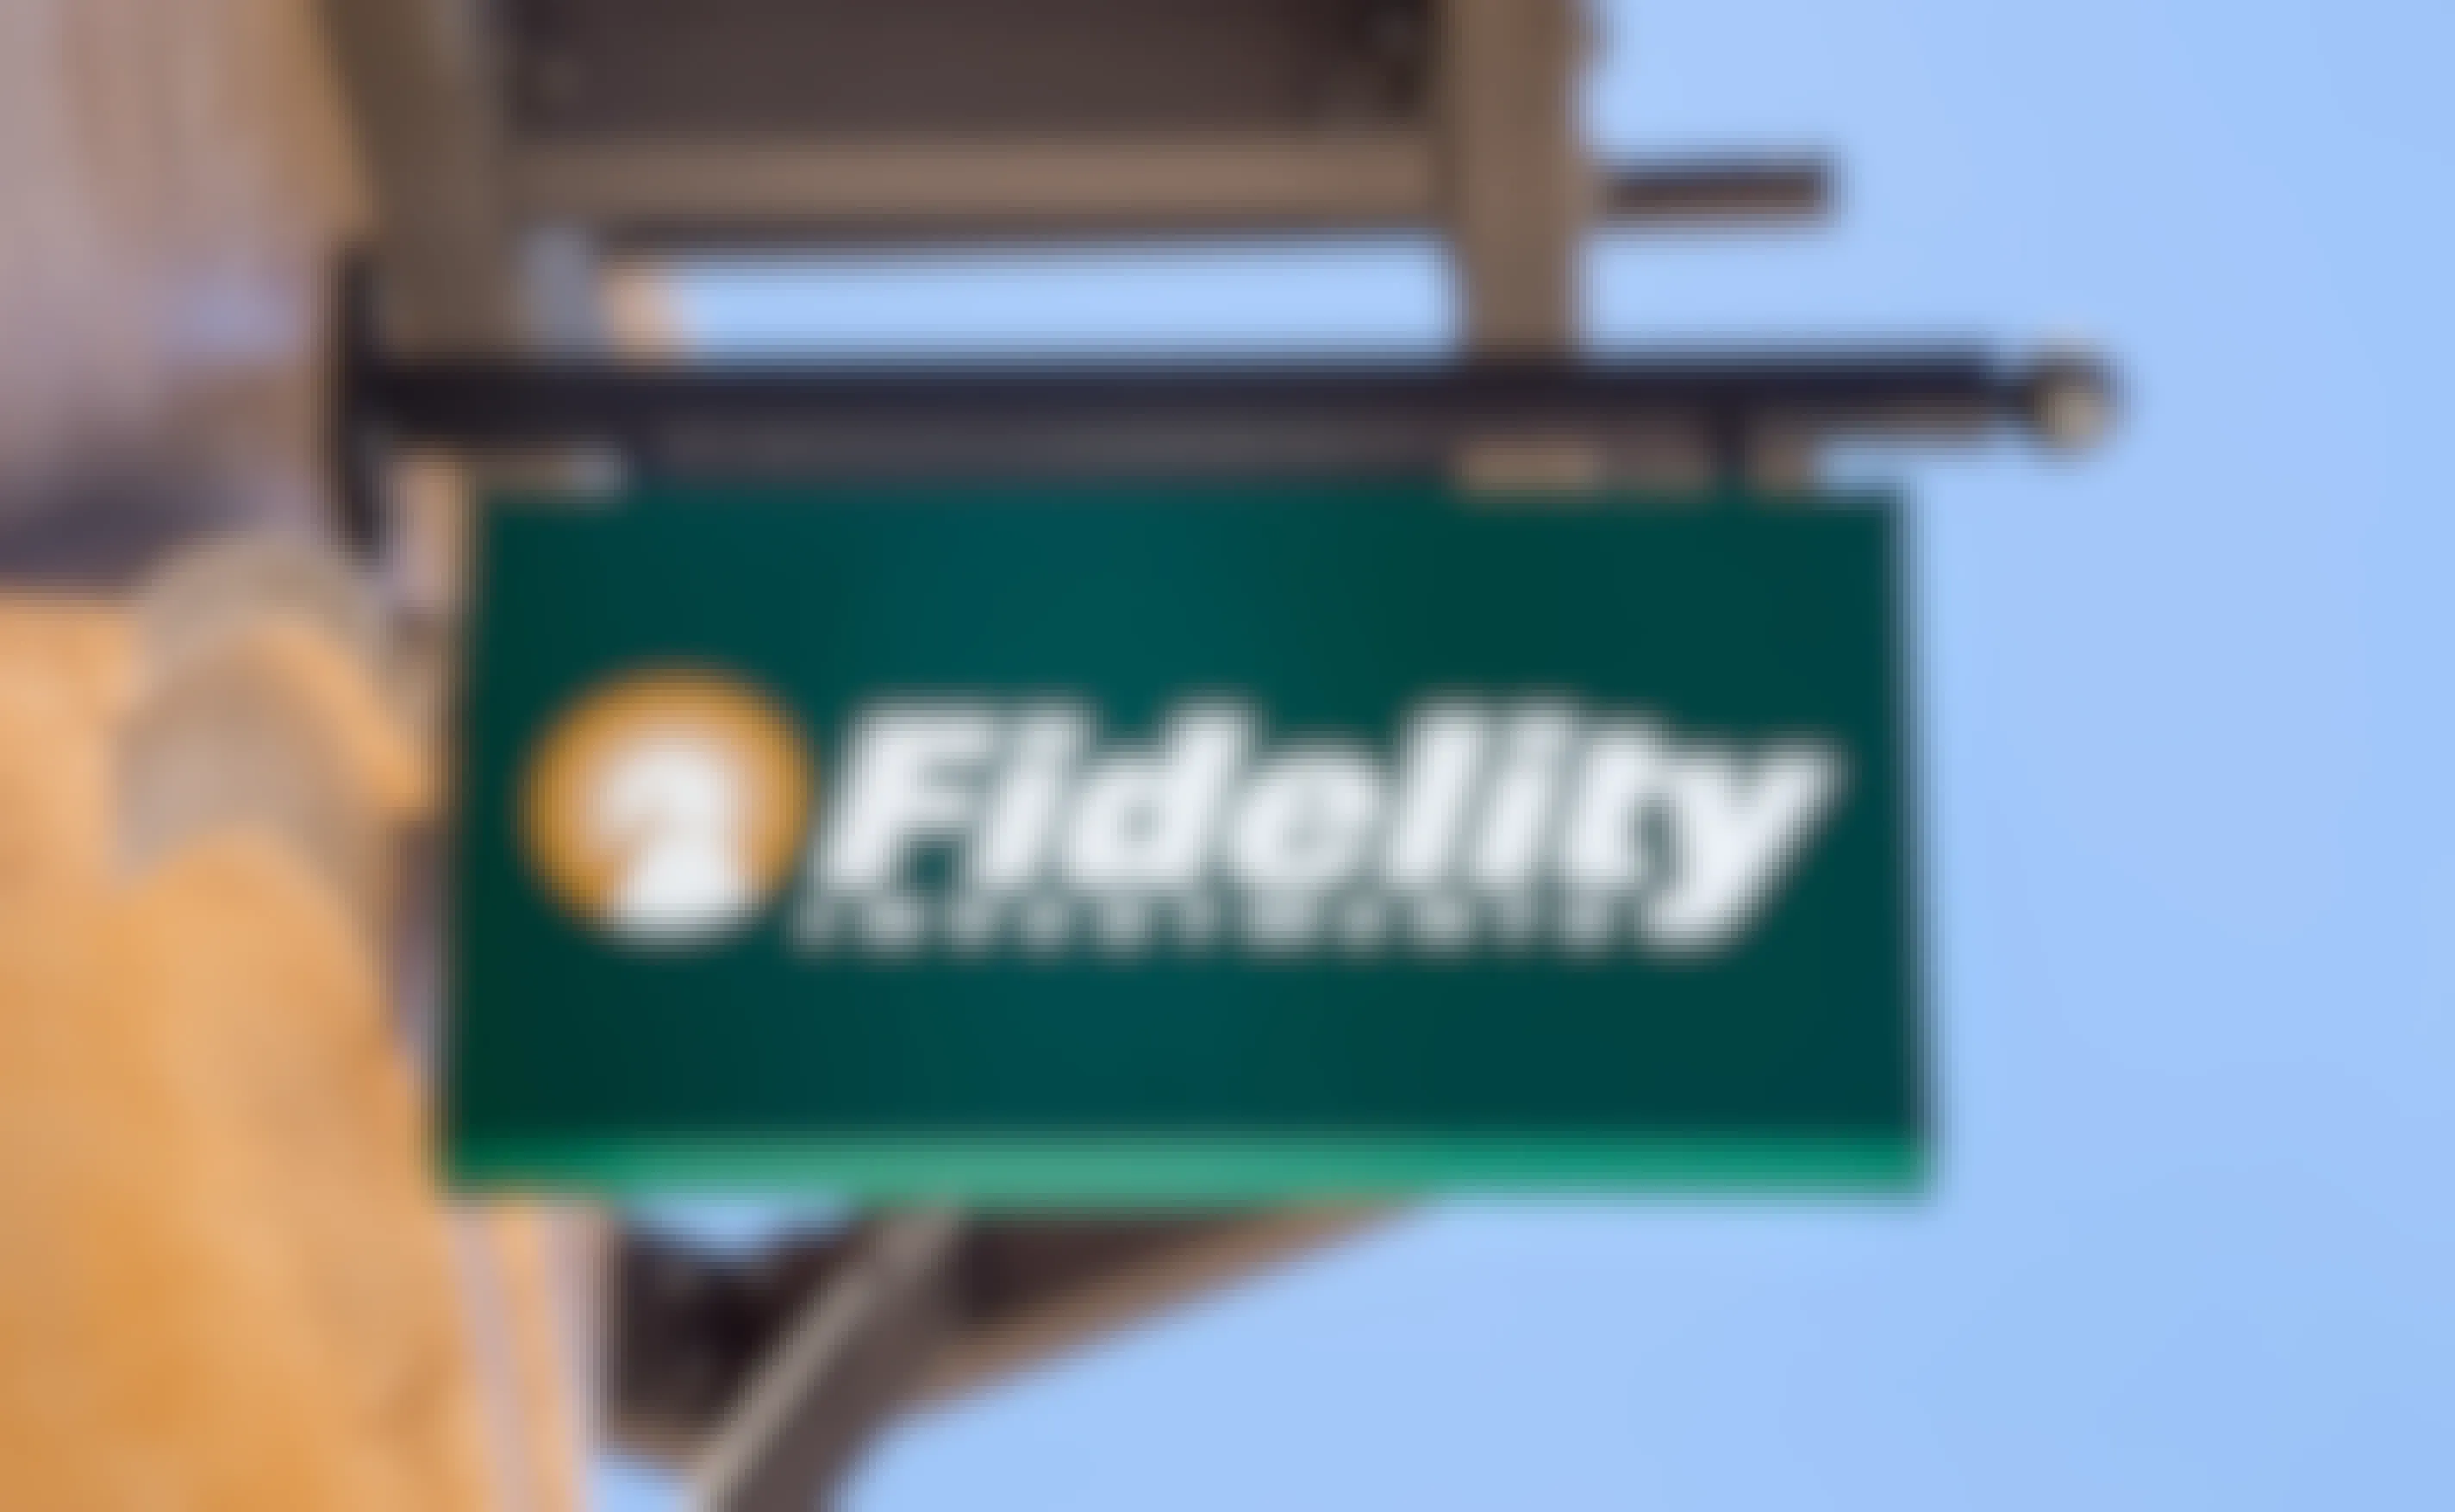 The Fidelity logo on a sign hanging against the sky